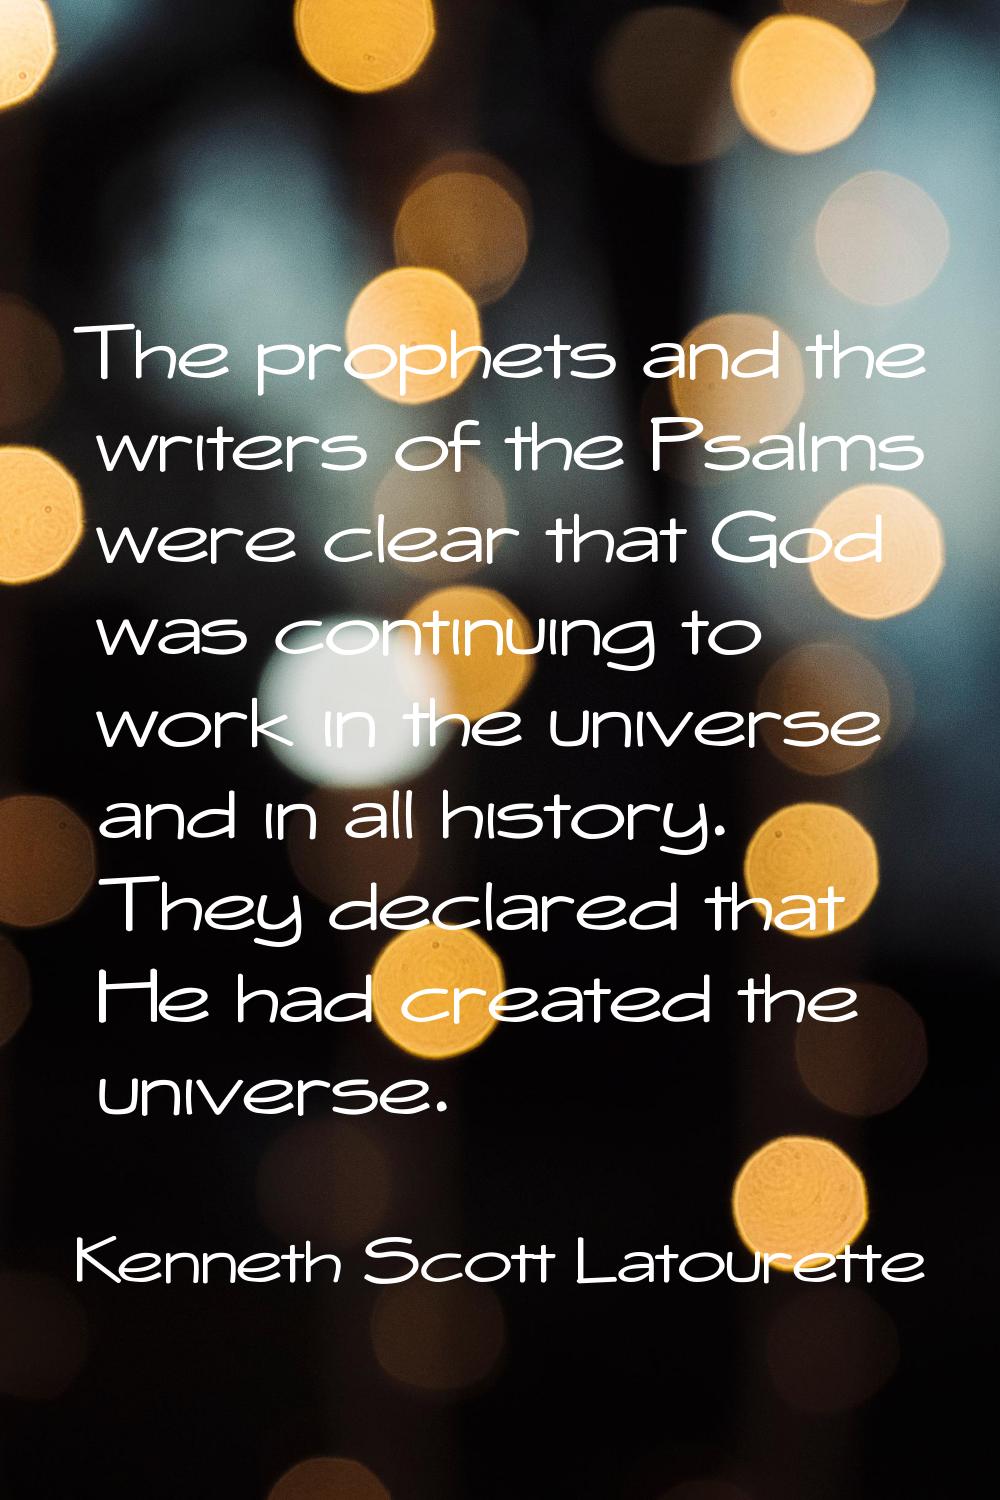 The prophets and the writers of the Psalms were clear that God was continuing to work in the univer